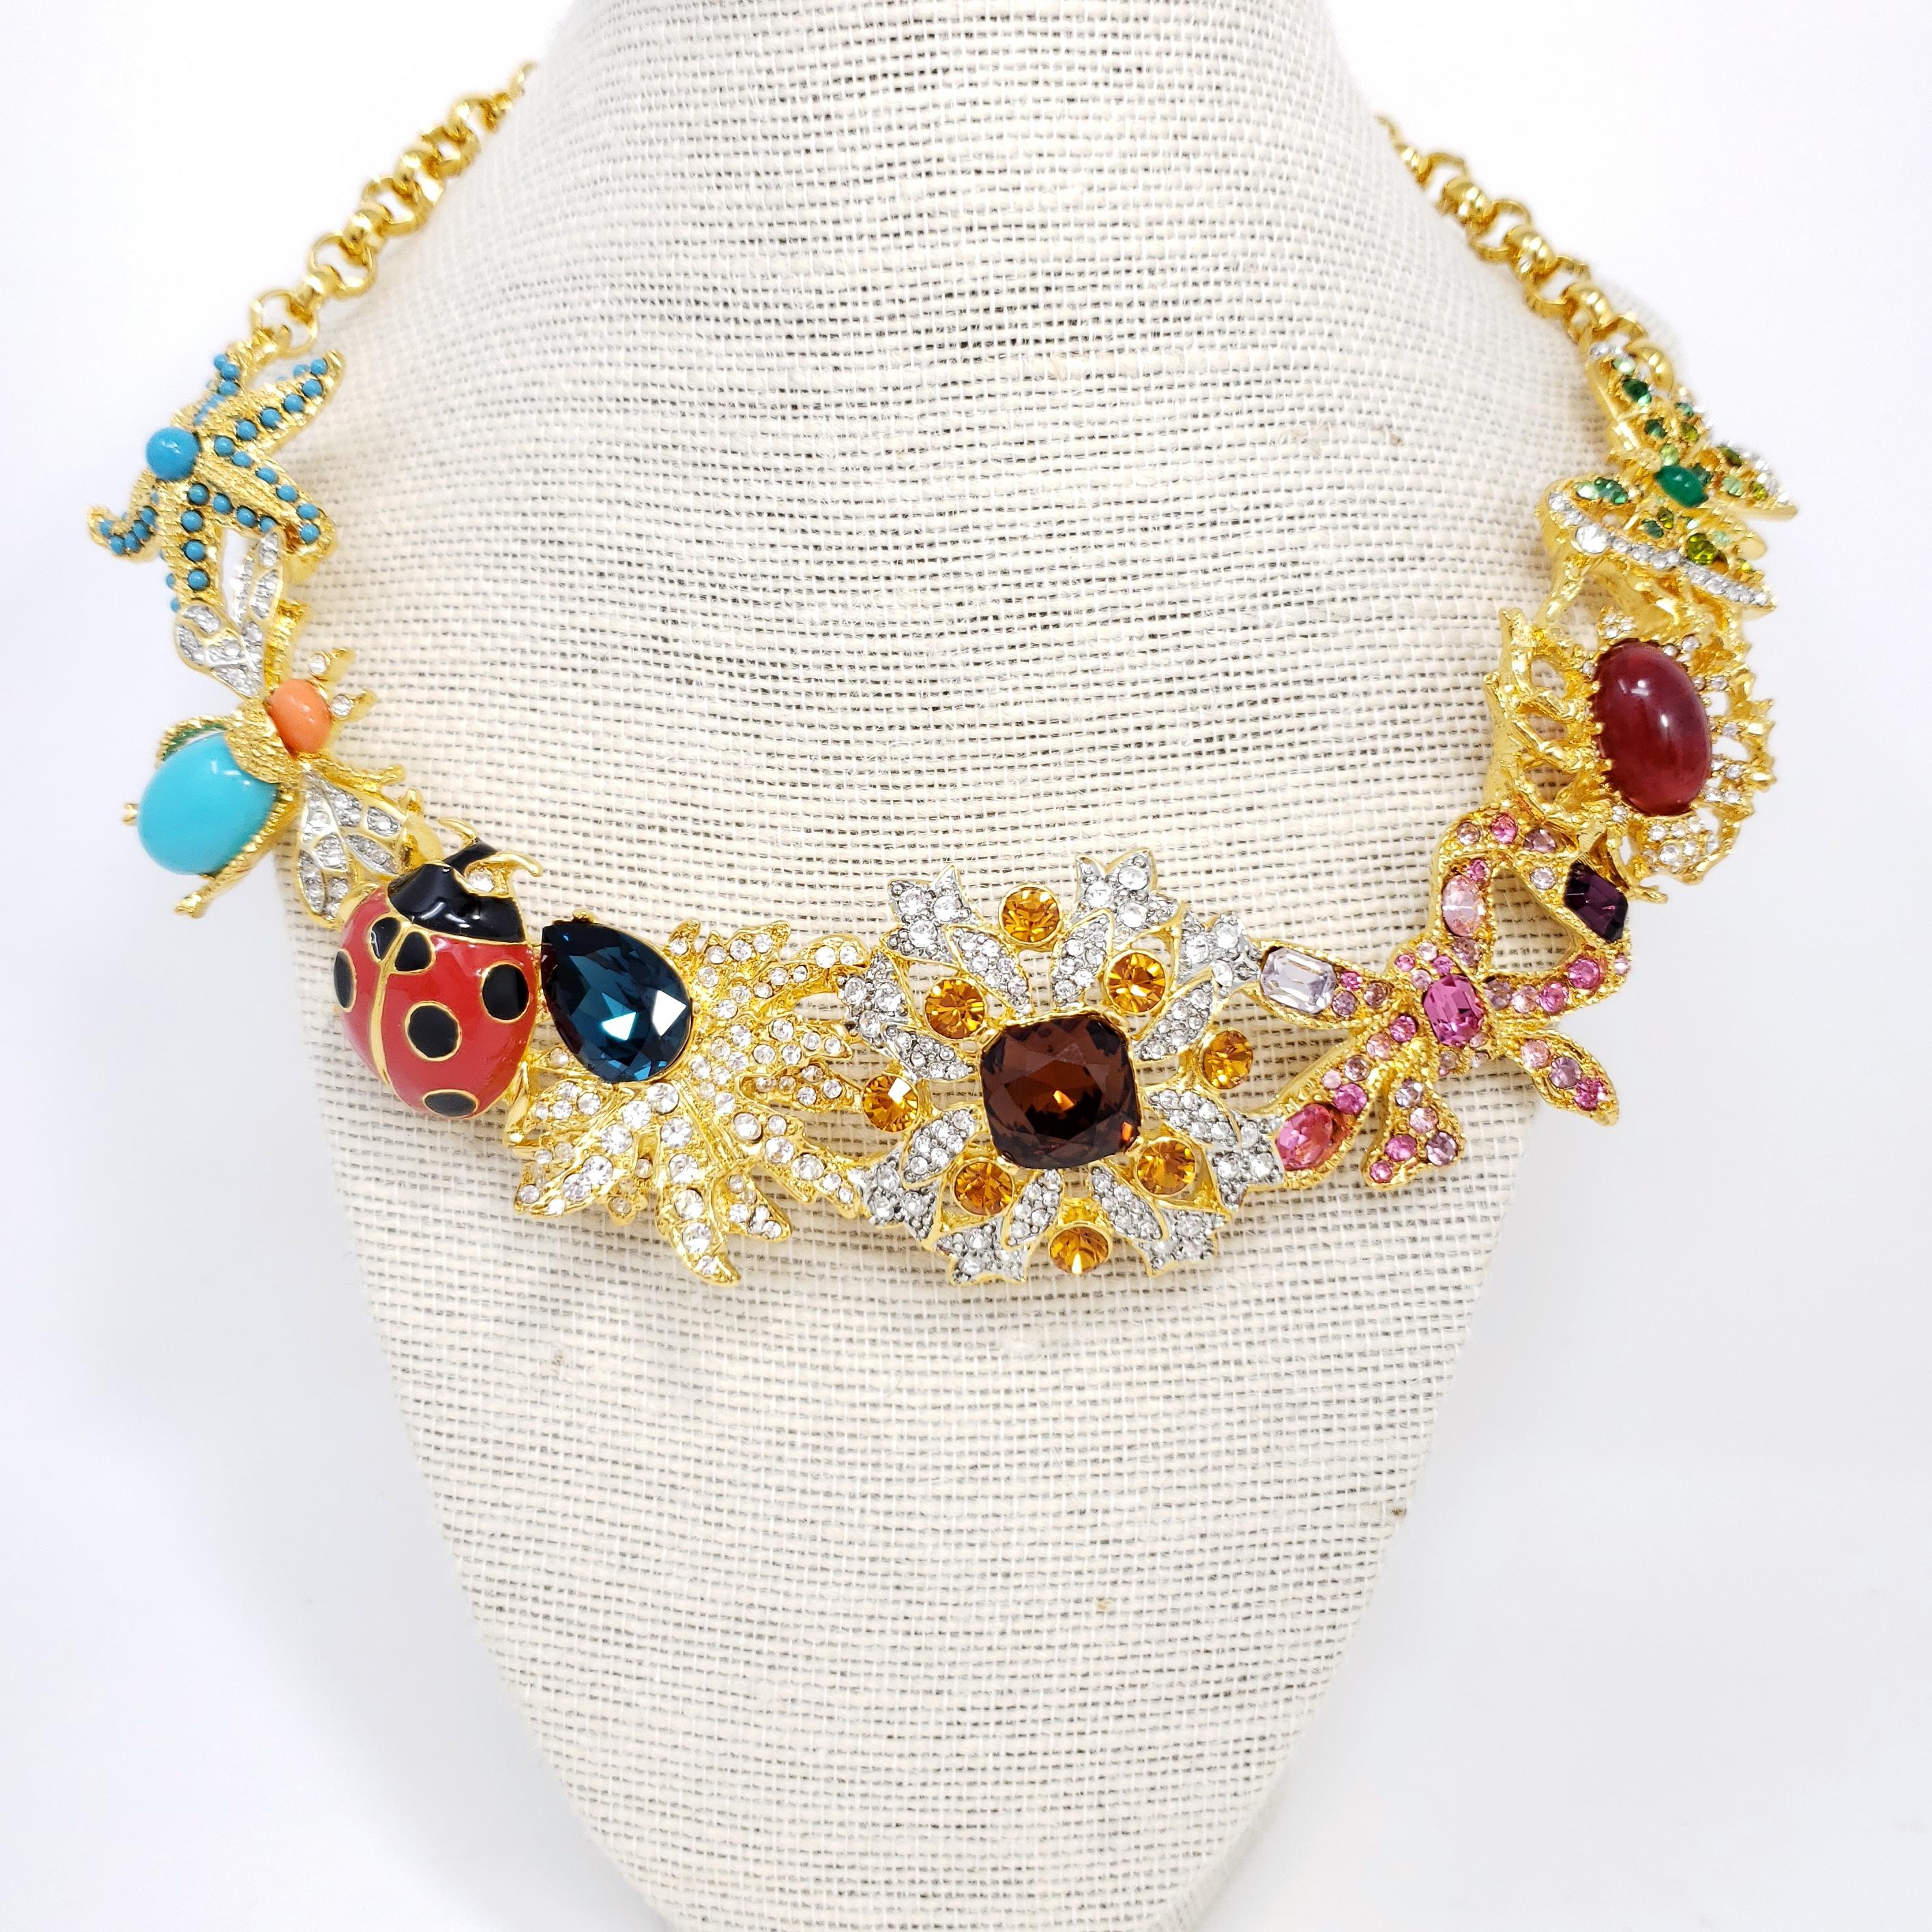 Kaleidoscope necklace by Kenneth Jay Lane. Signature KJL designs linked together to form a dazzling statement necklace! Colorful starfish, fly, ladybug, butterfly, jelly belly spider, flower, and leaf motifs.

Features faux pearls, painted enamel,